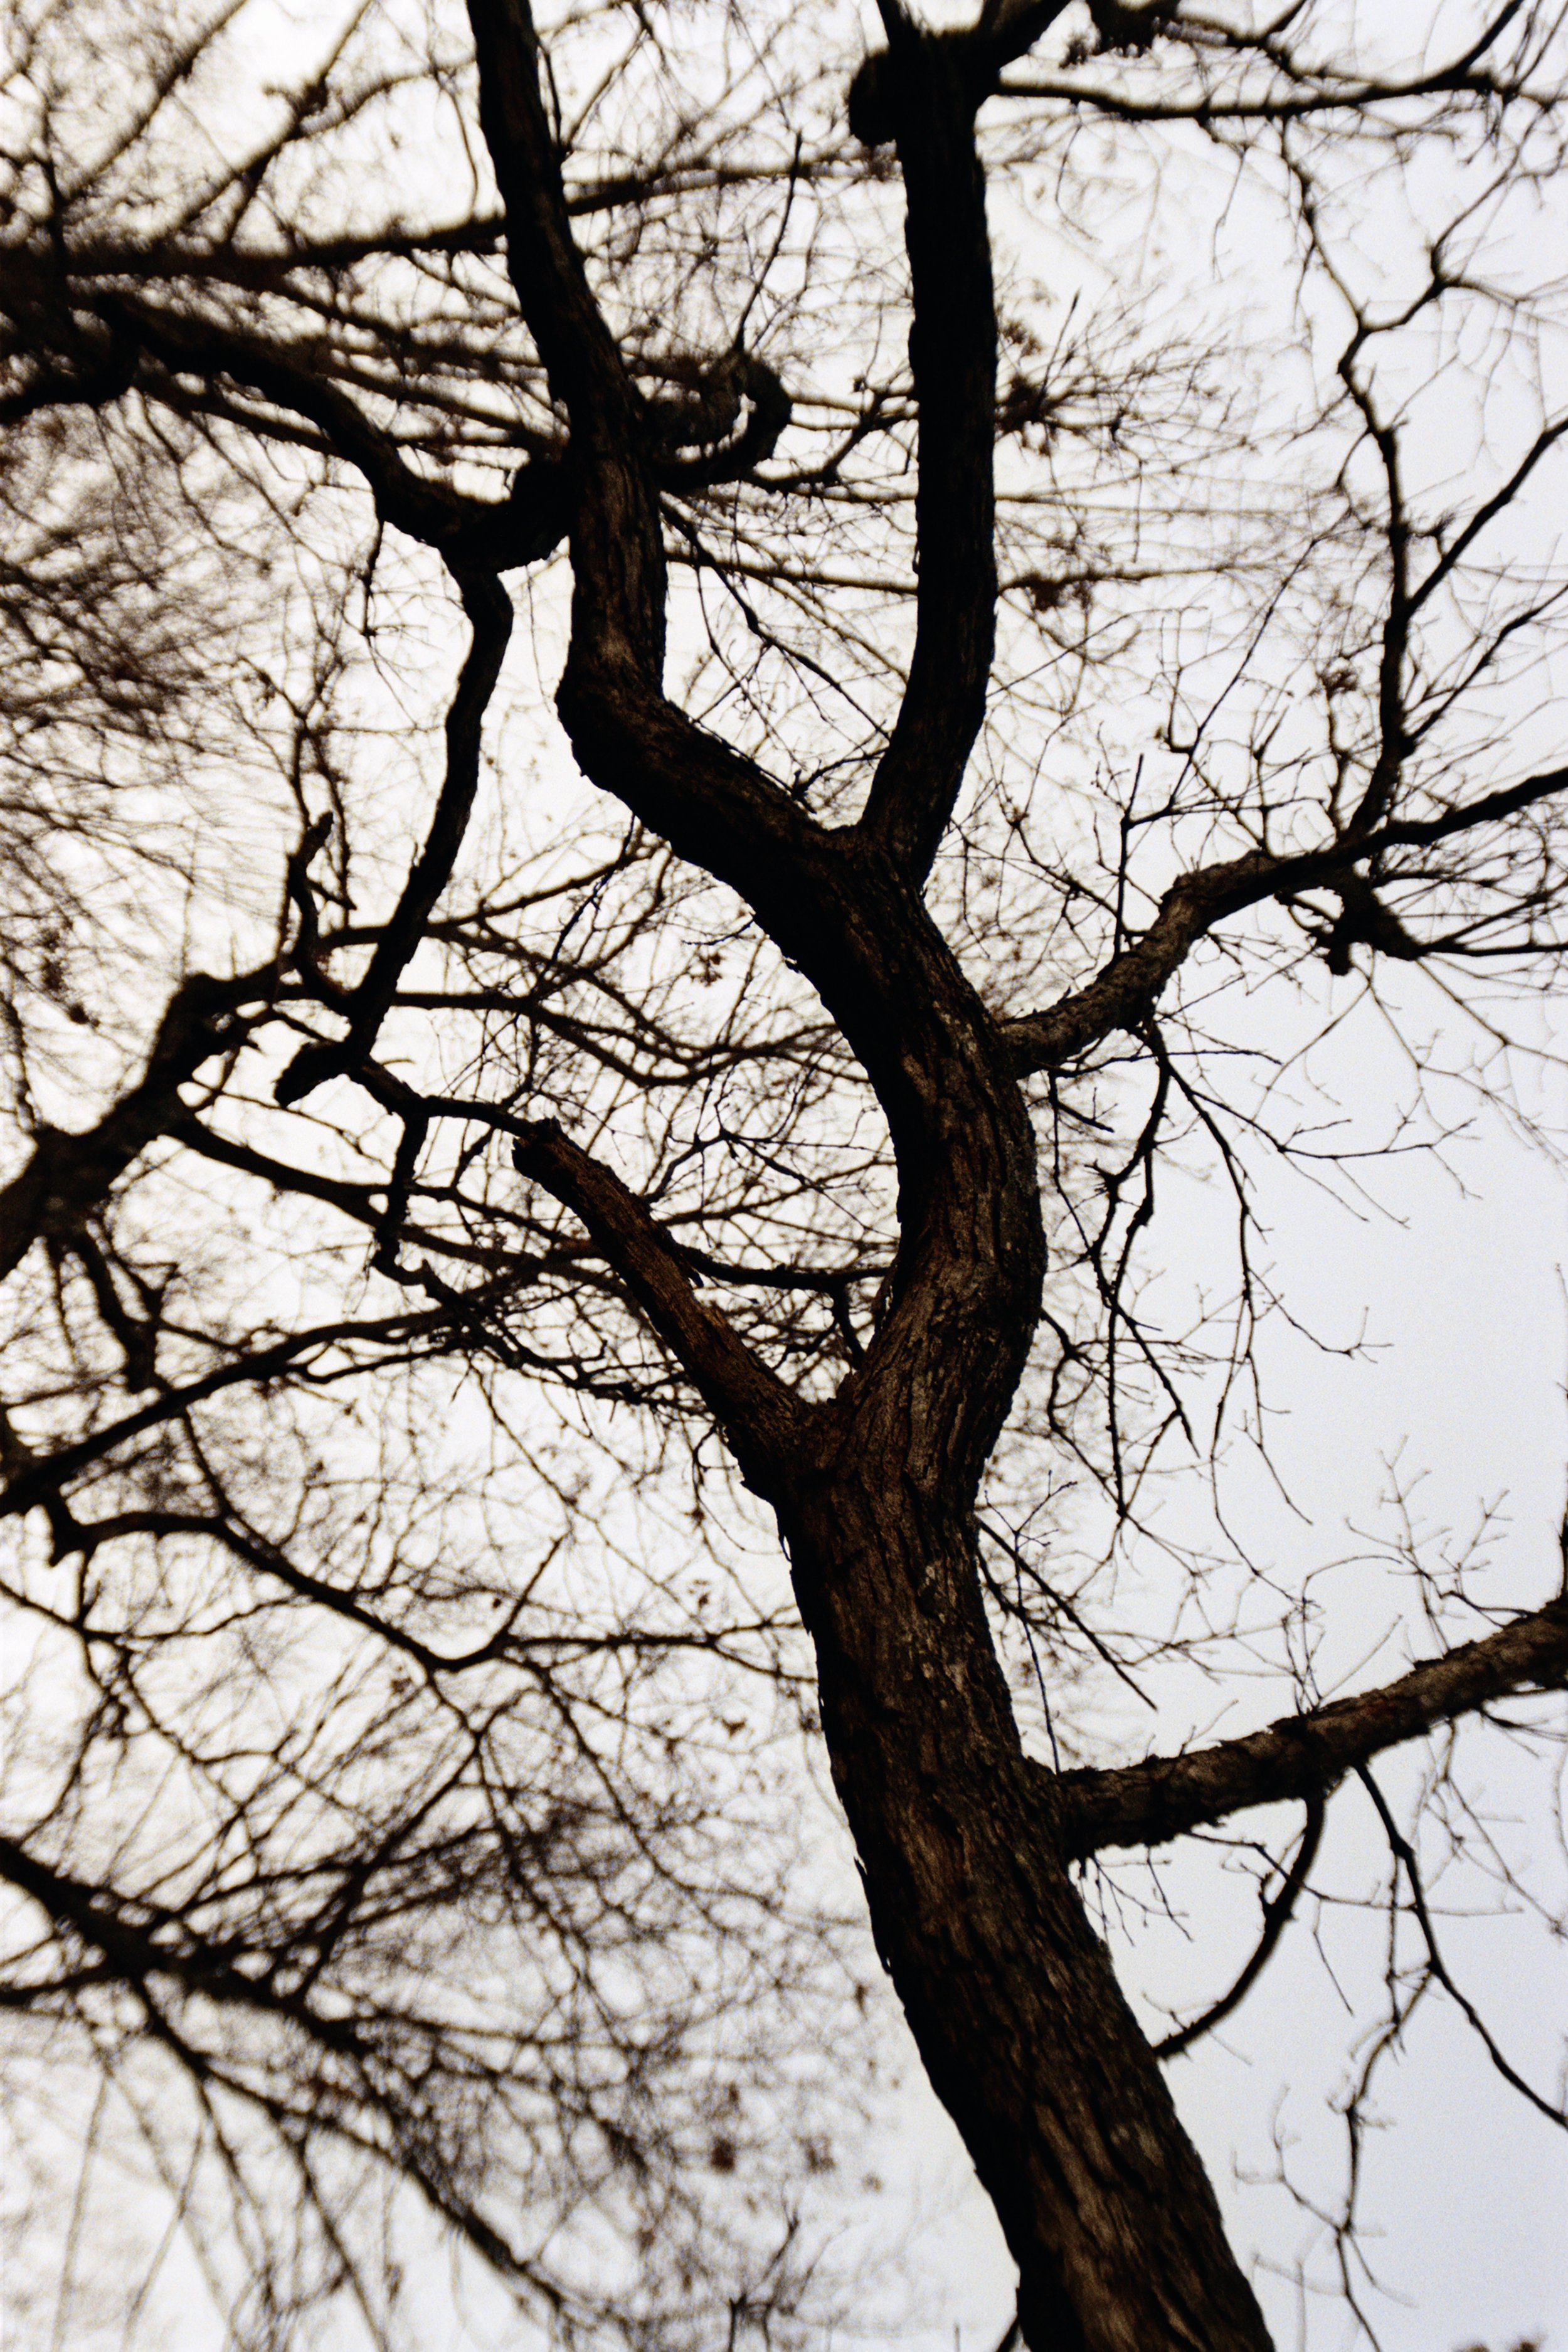 TREE_2_ENCHANTED FORESTS SERIES_8X10.jpg